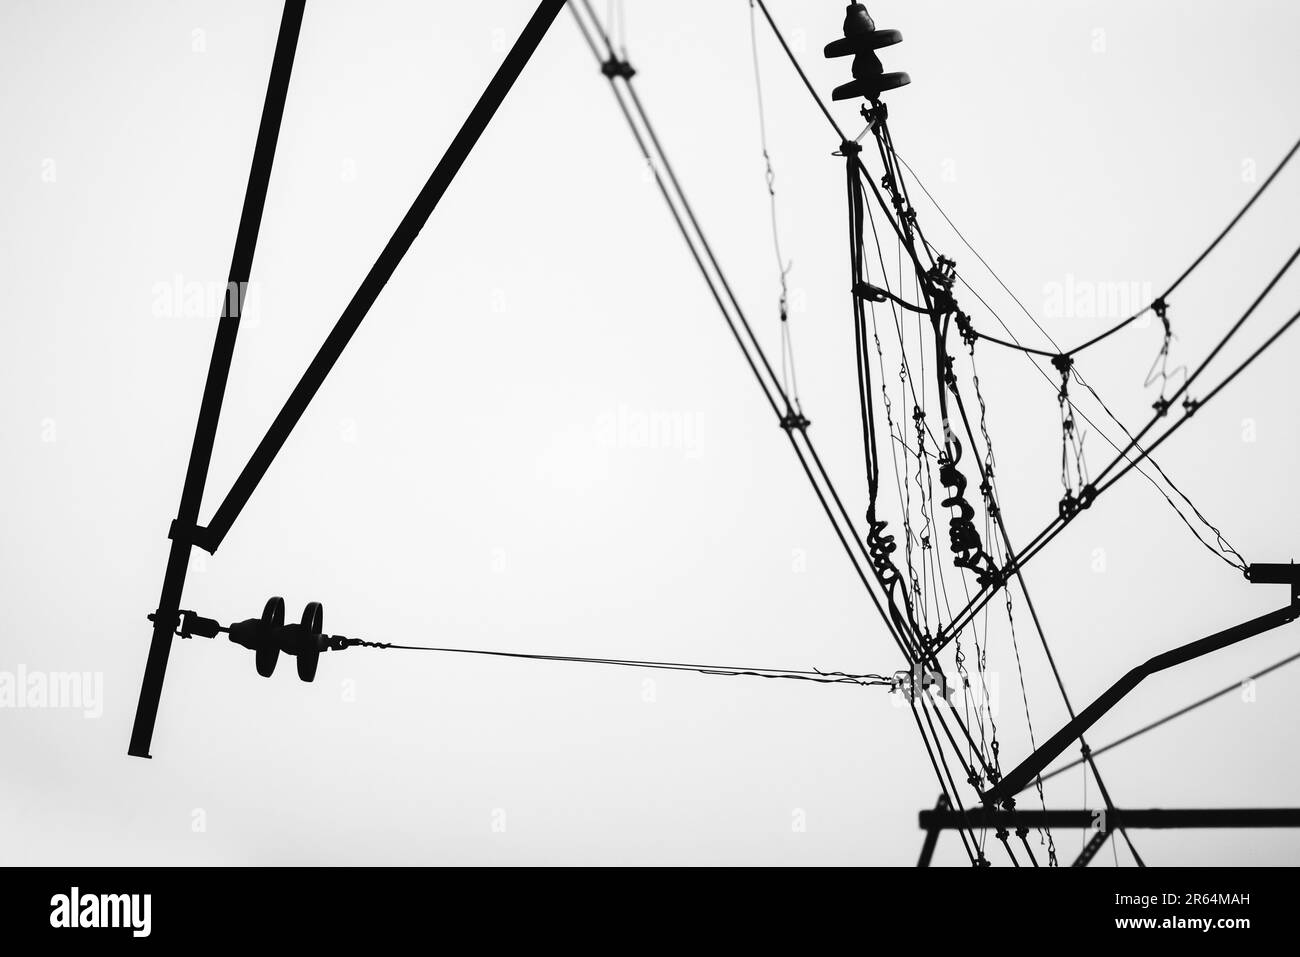 Overhead power lines of a railway are under white sky, monochrome silhouette photo Stock Photo